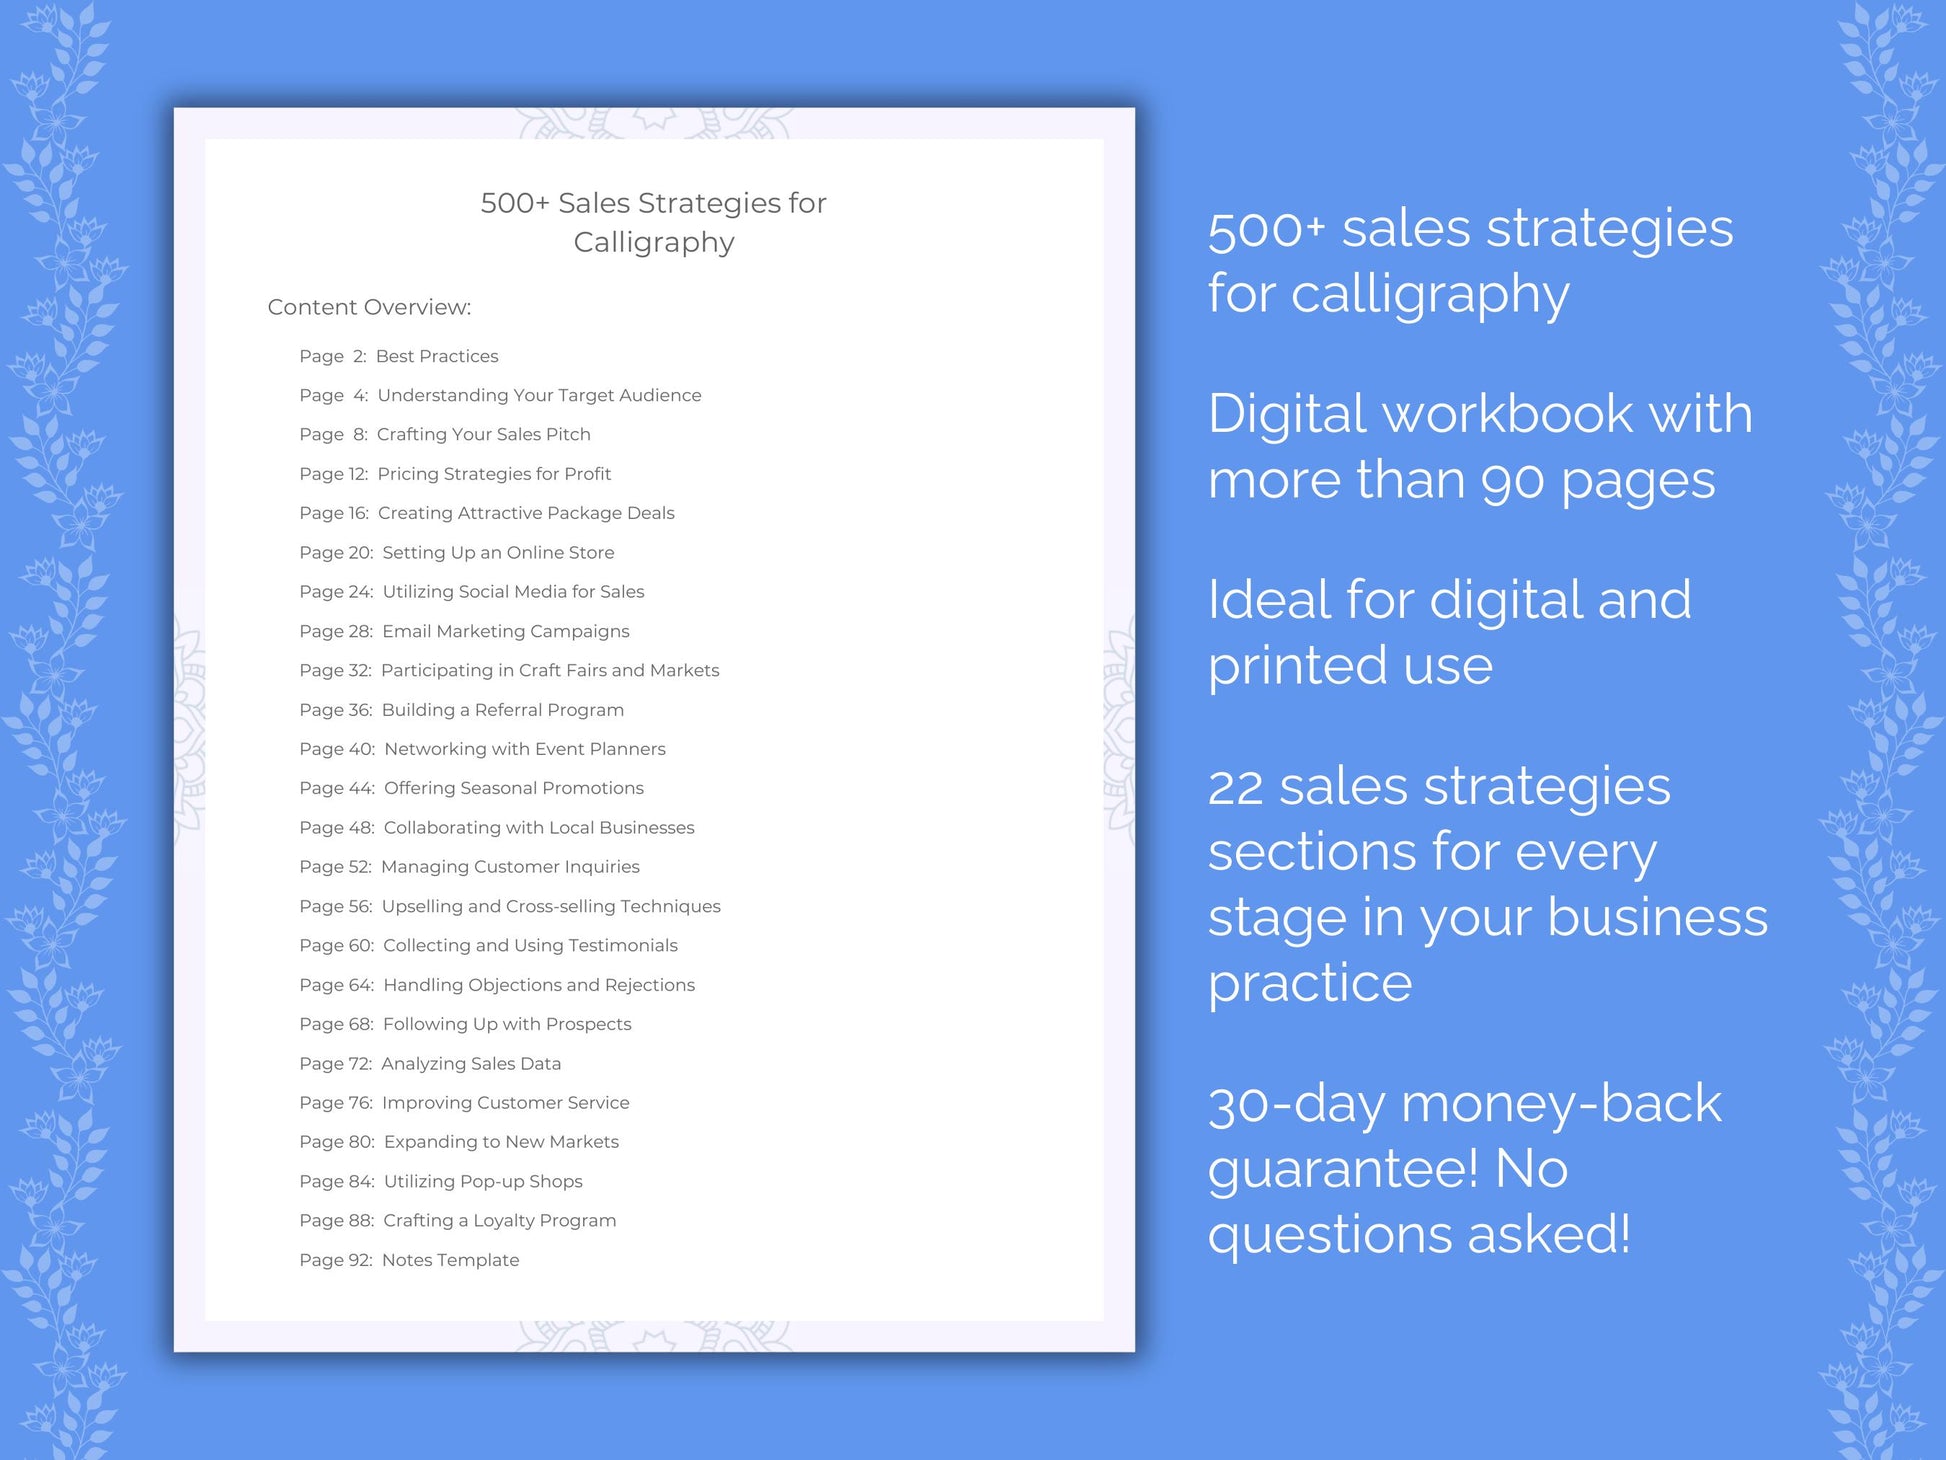 Calligraphy Business Resource